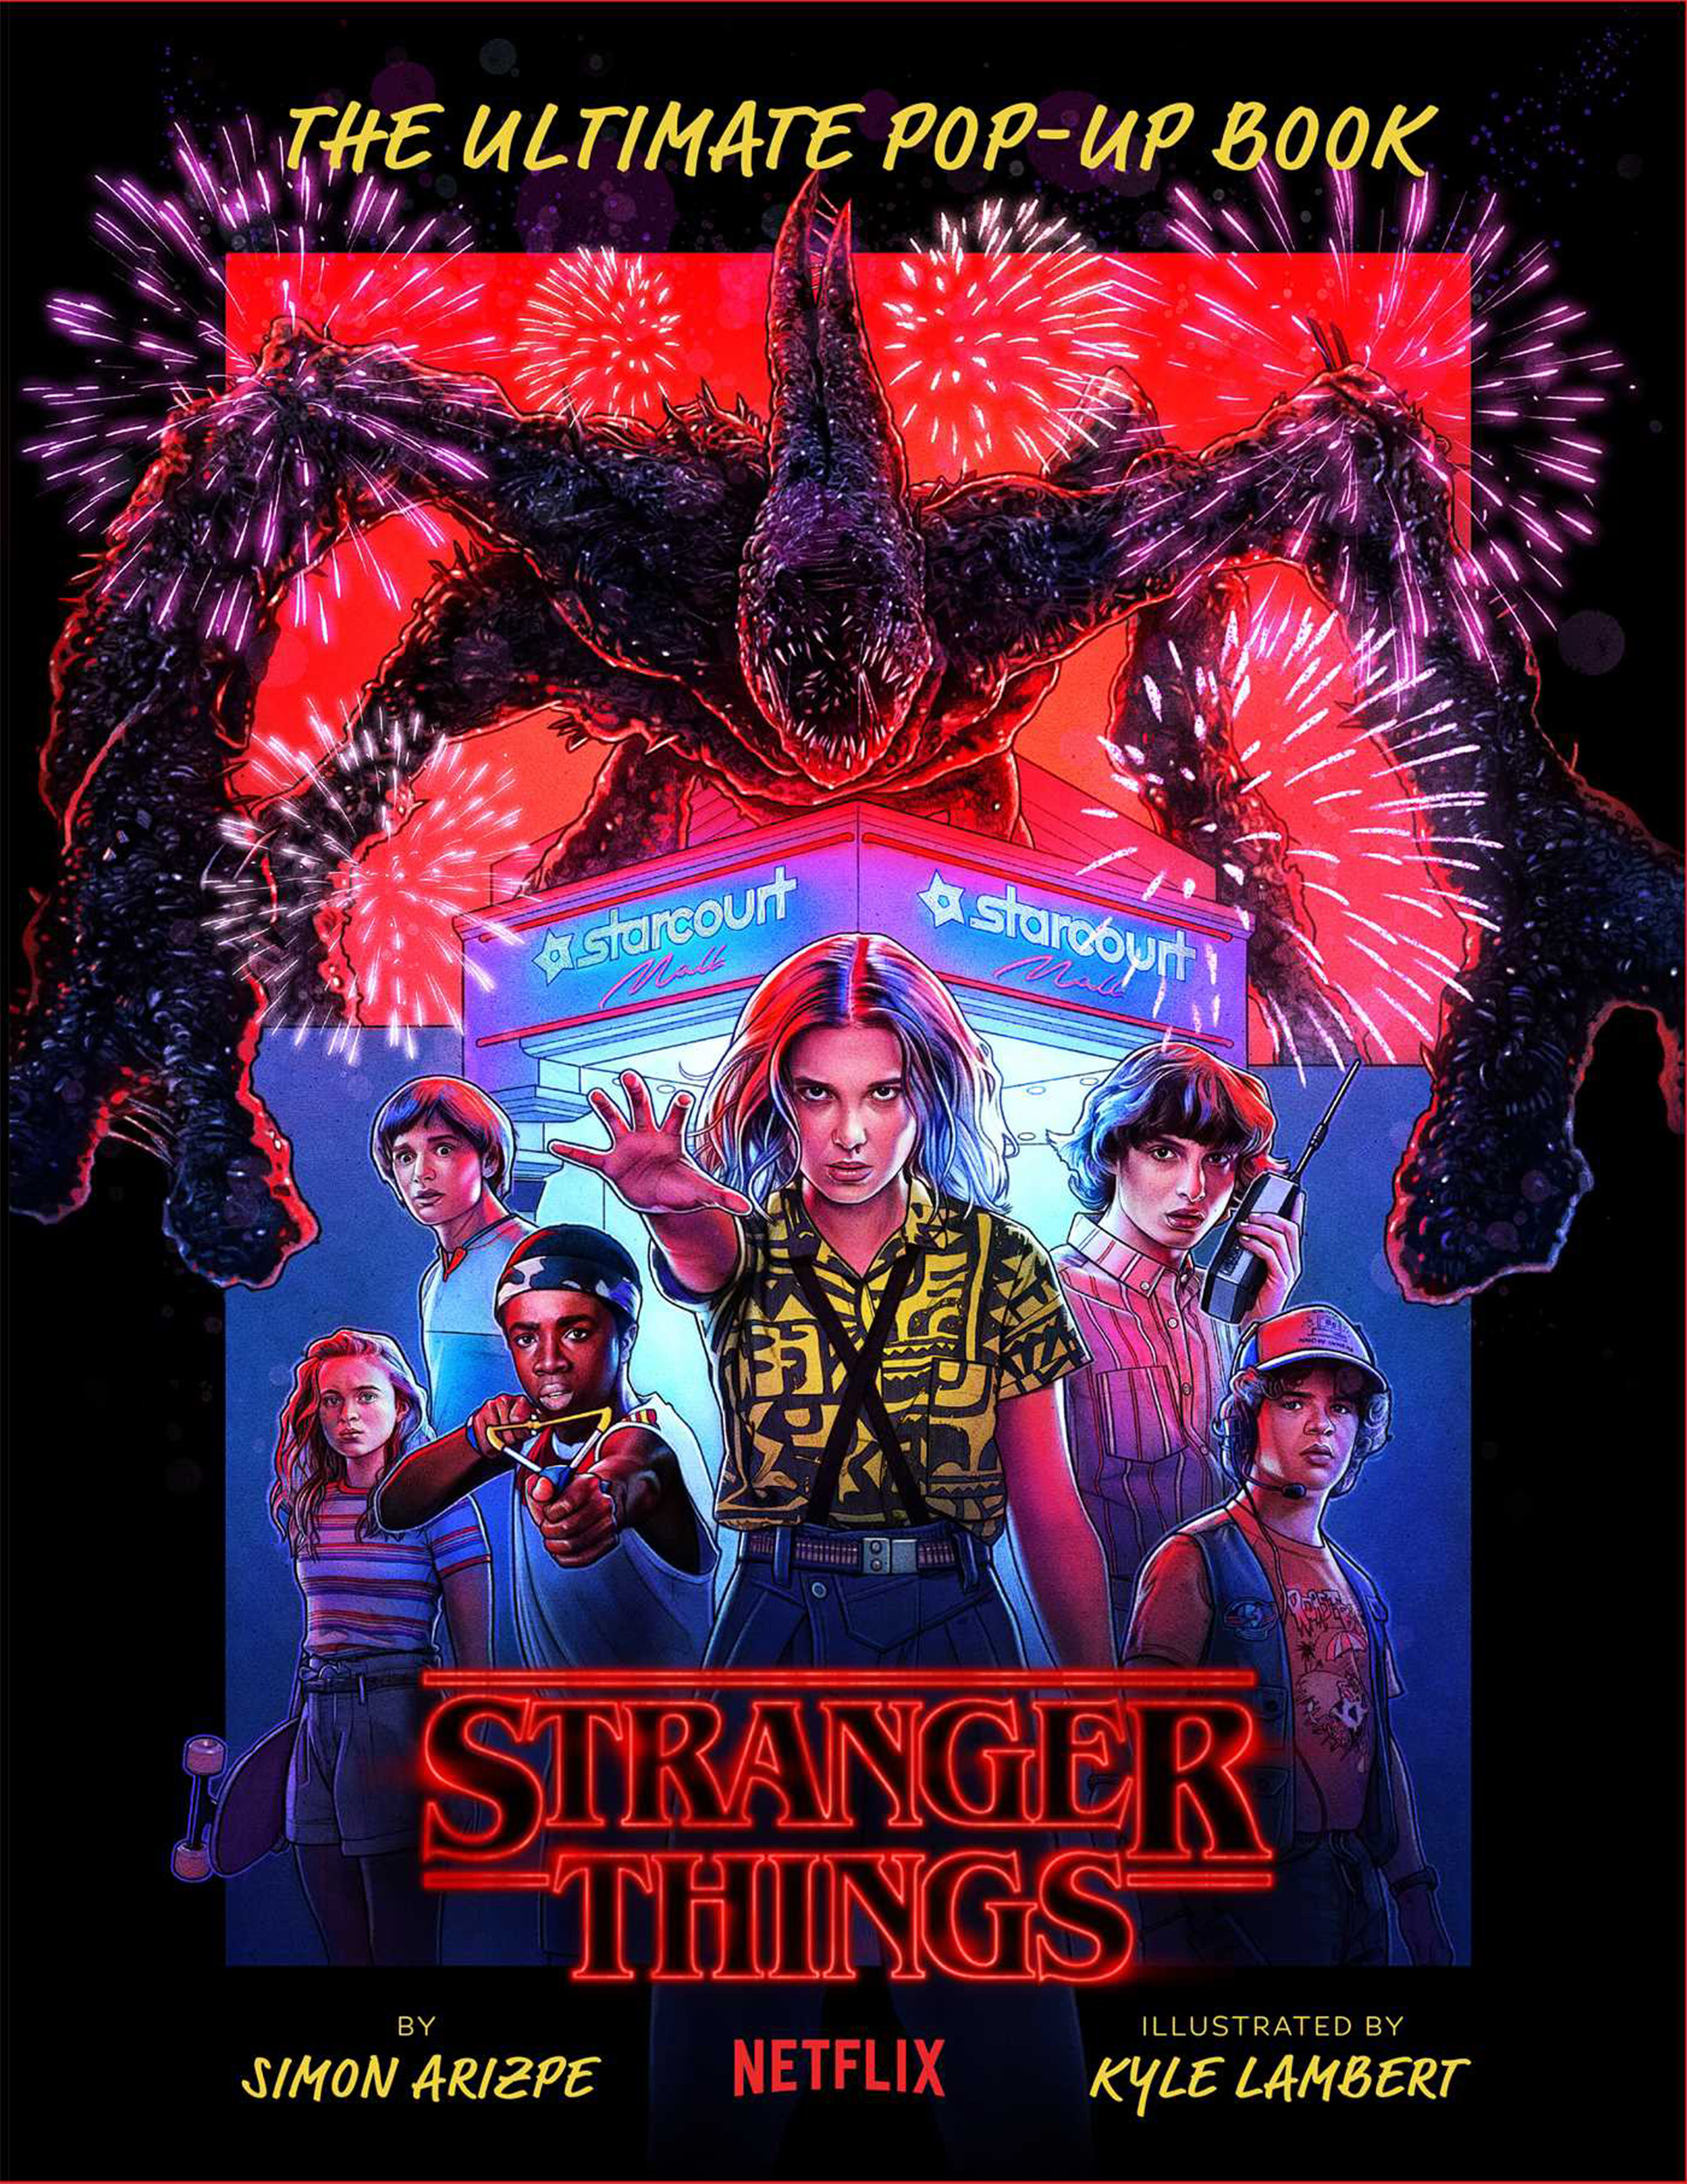 Stranger Things - The Ultimate Pop-Up Book - Cover by Kyle Lambert